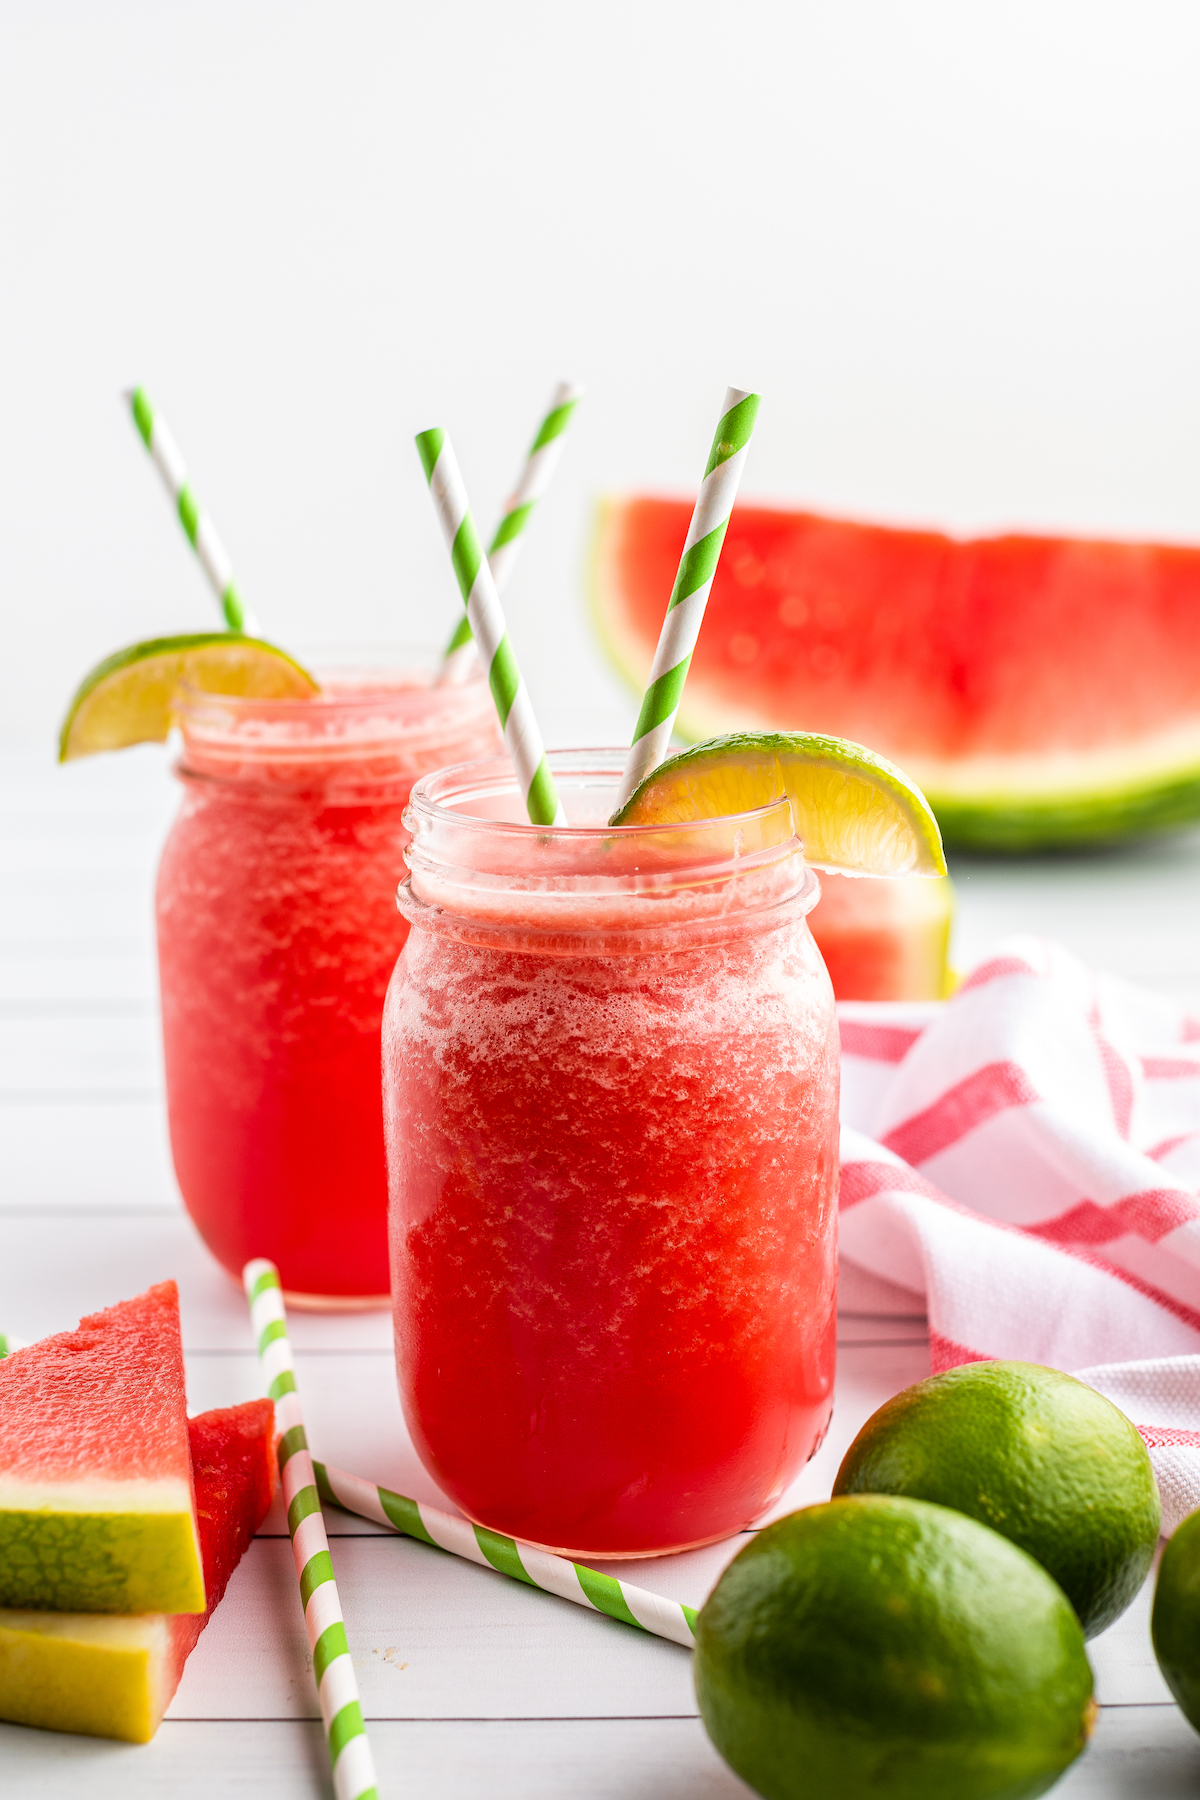 Two watermelon limeade slushies in mason jars, side-by-side, garnished with lime wedges and striped straws.